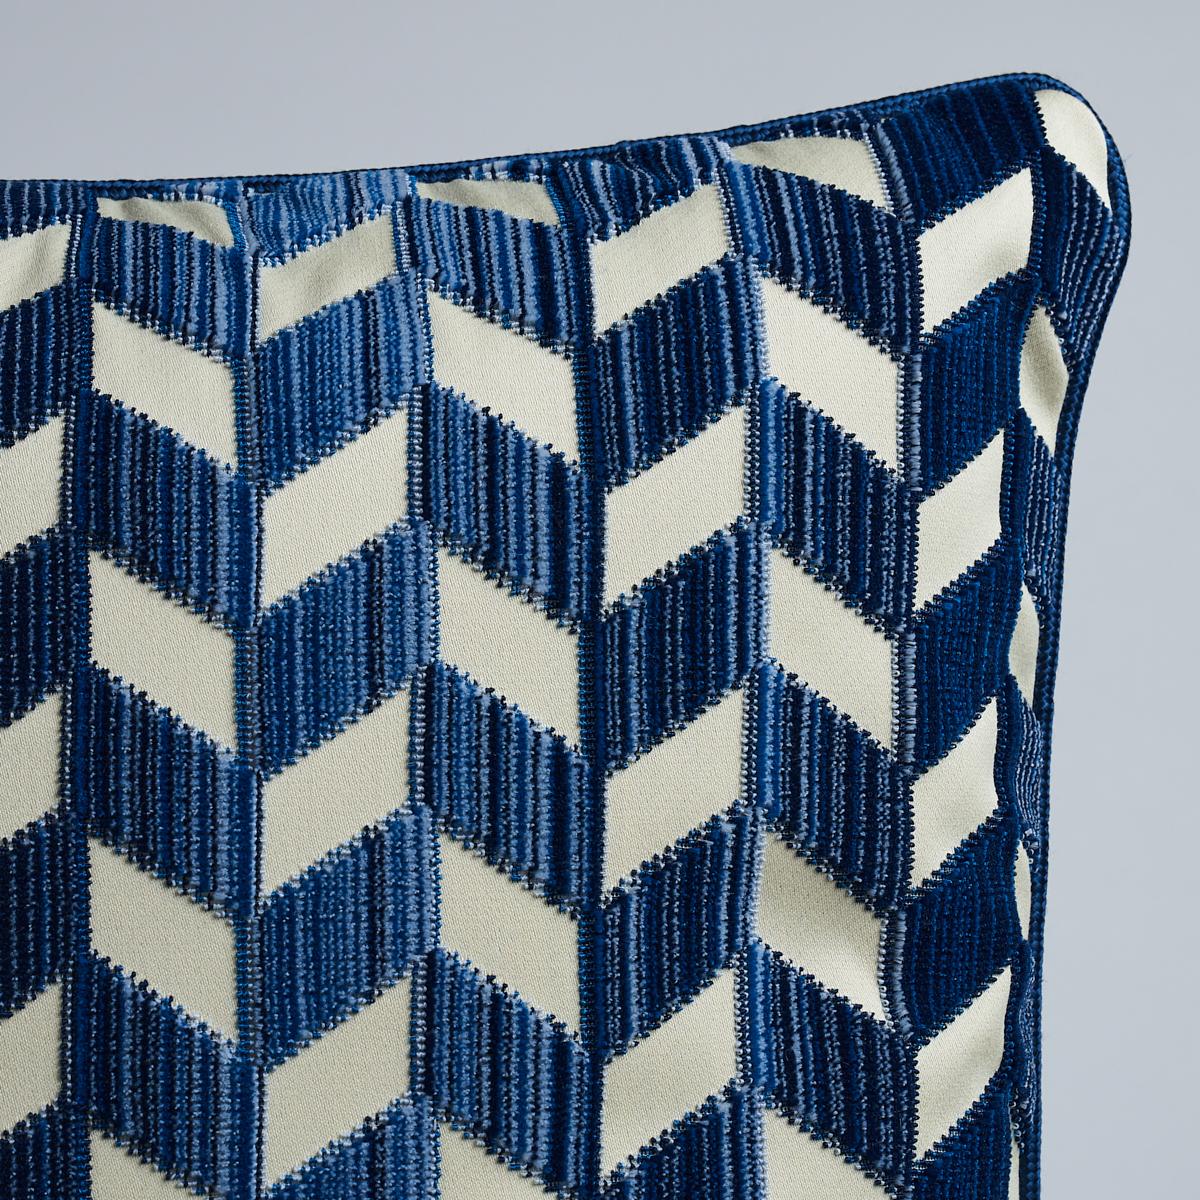 This pillow features Full Circle with a self welt finish. When an artisanal warp print meets a graphic stripe made of circles, the results are enchanting. Pillow includes a feather/down fill insert and hidden zipper closure.

*If out of stock,